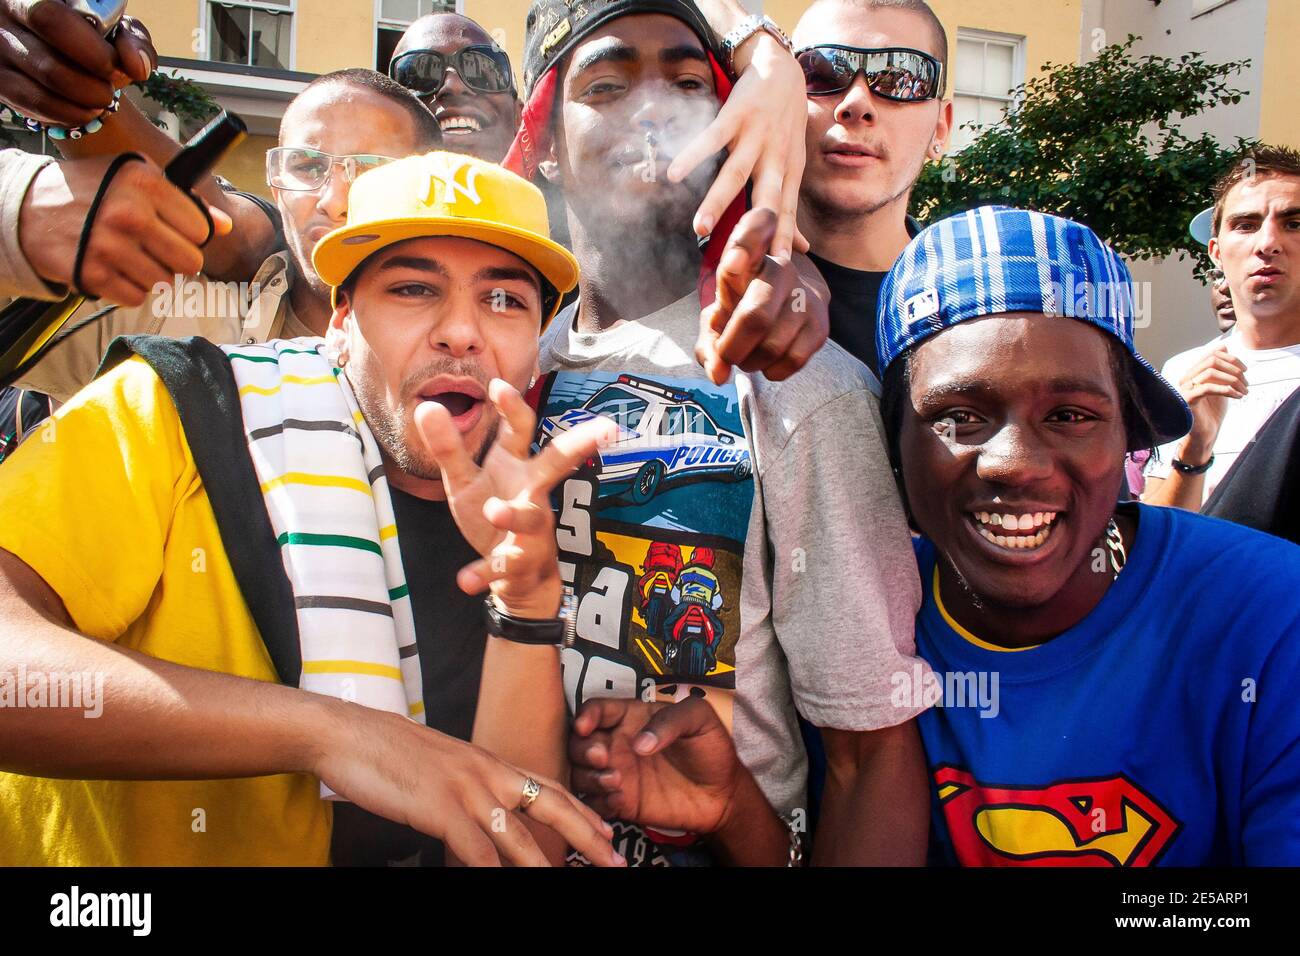 Group of young guys having a great time at Notting Hill Carnival Stock Photo